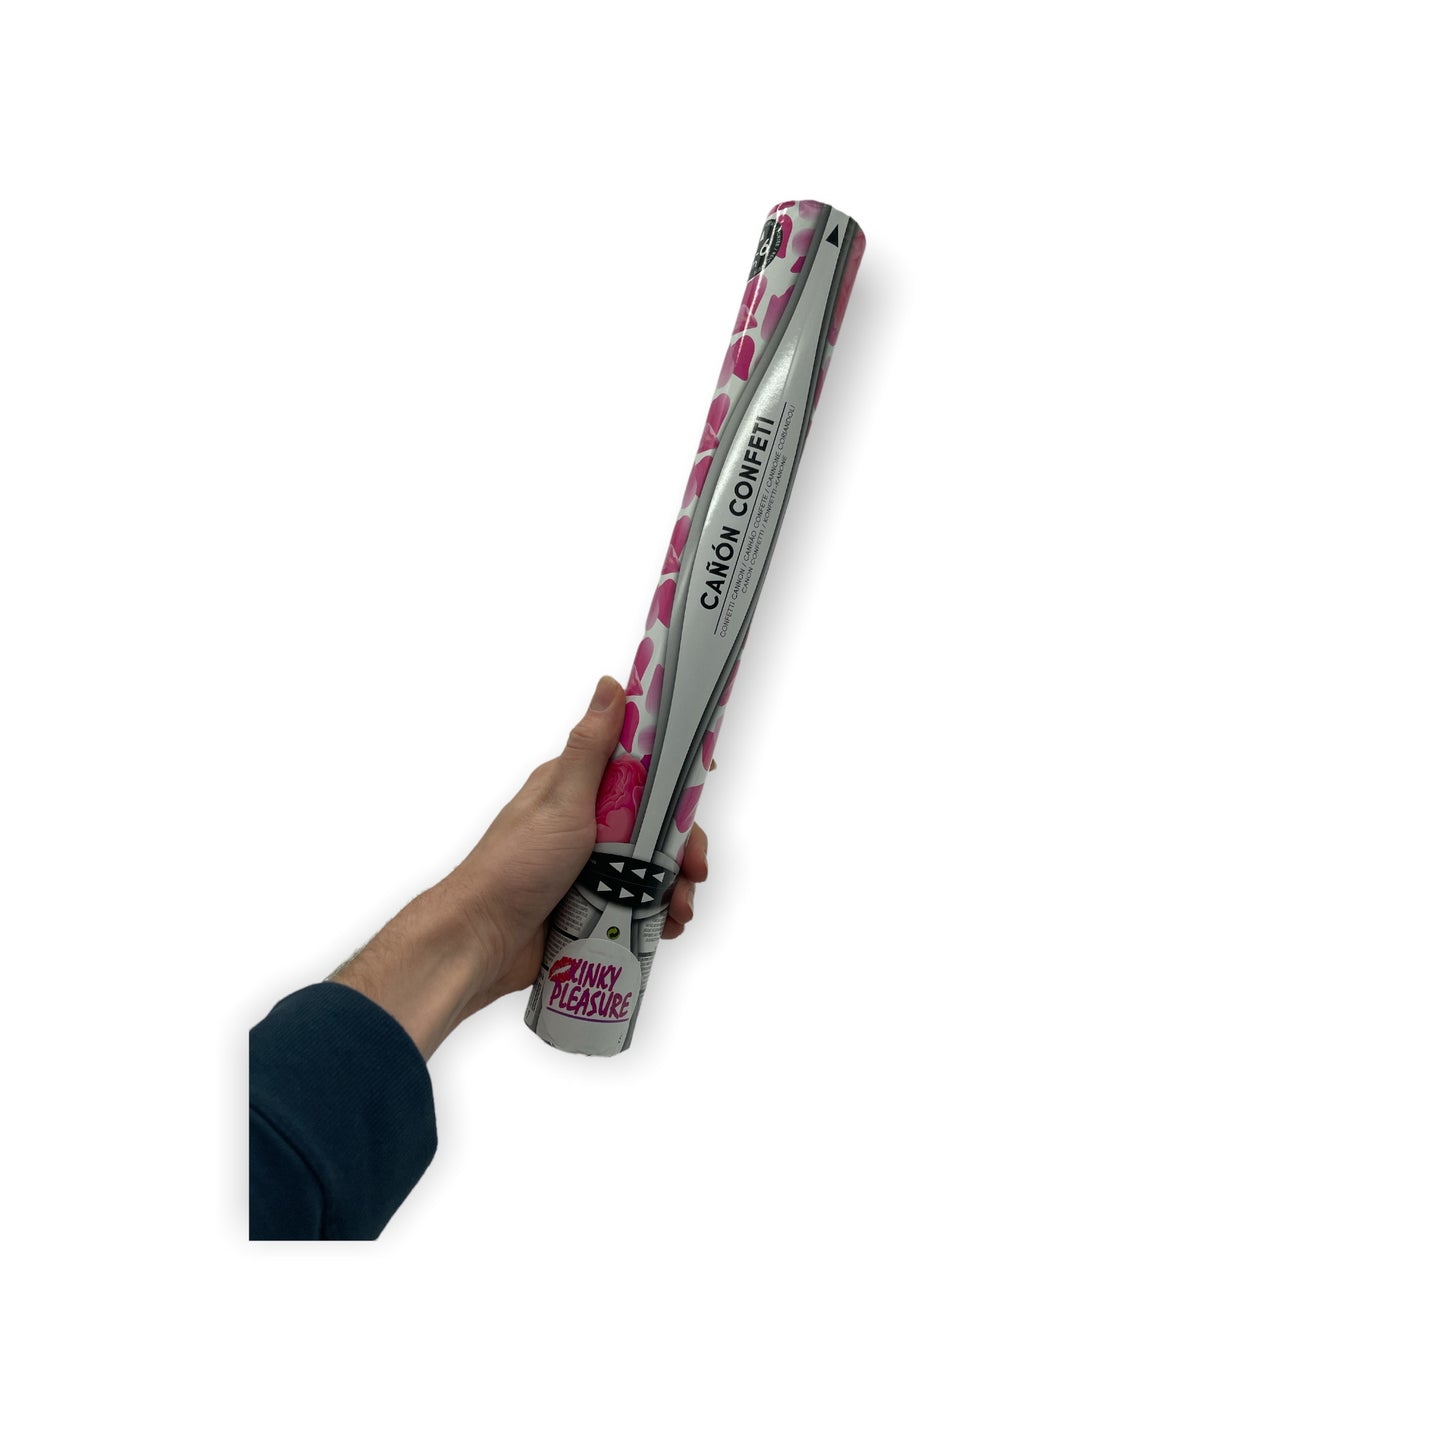 Create a festive atmosphere with the Red Hearts Confetti Cannon 40cm